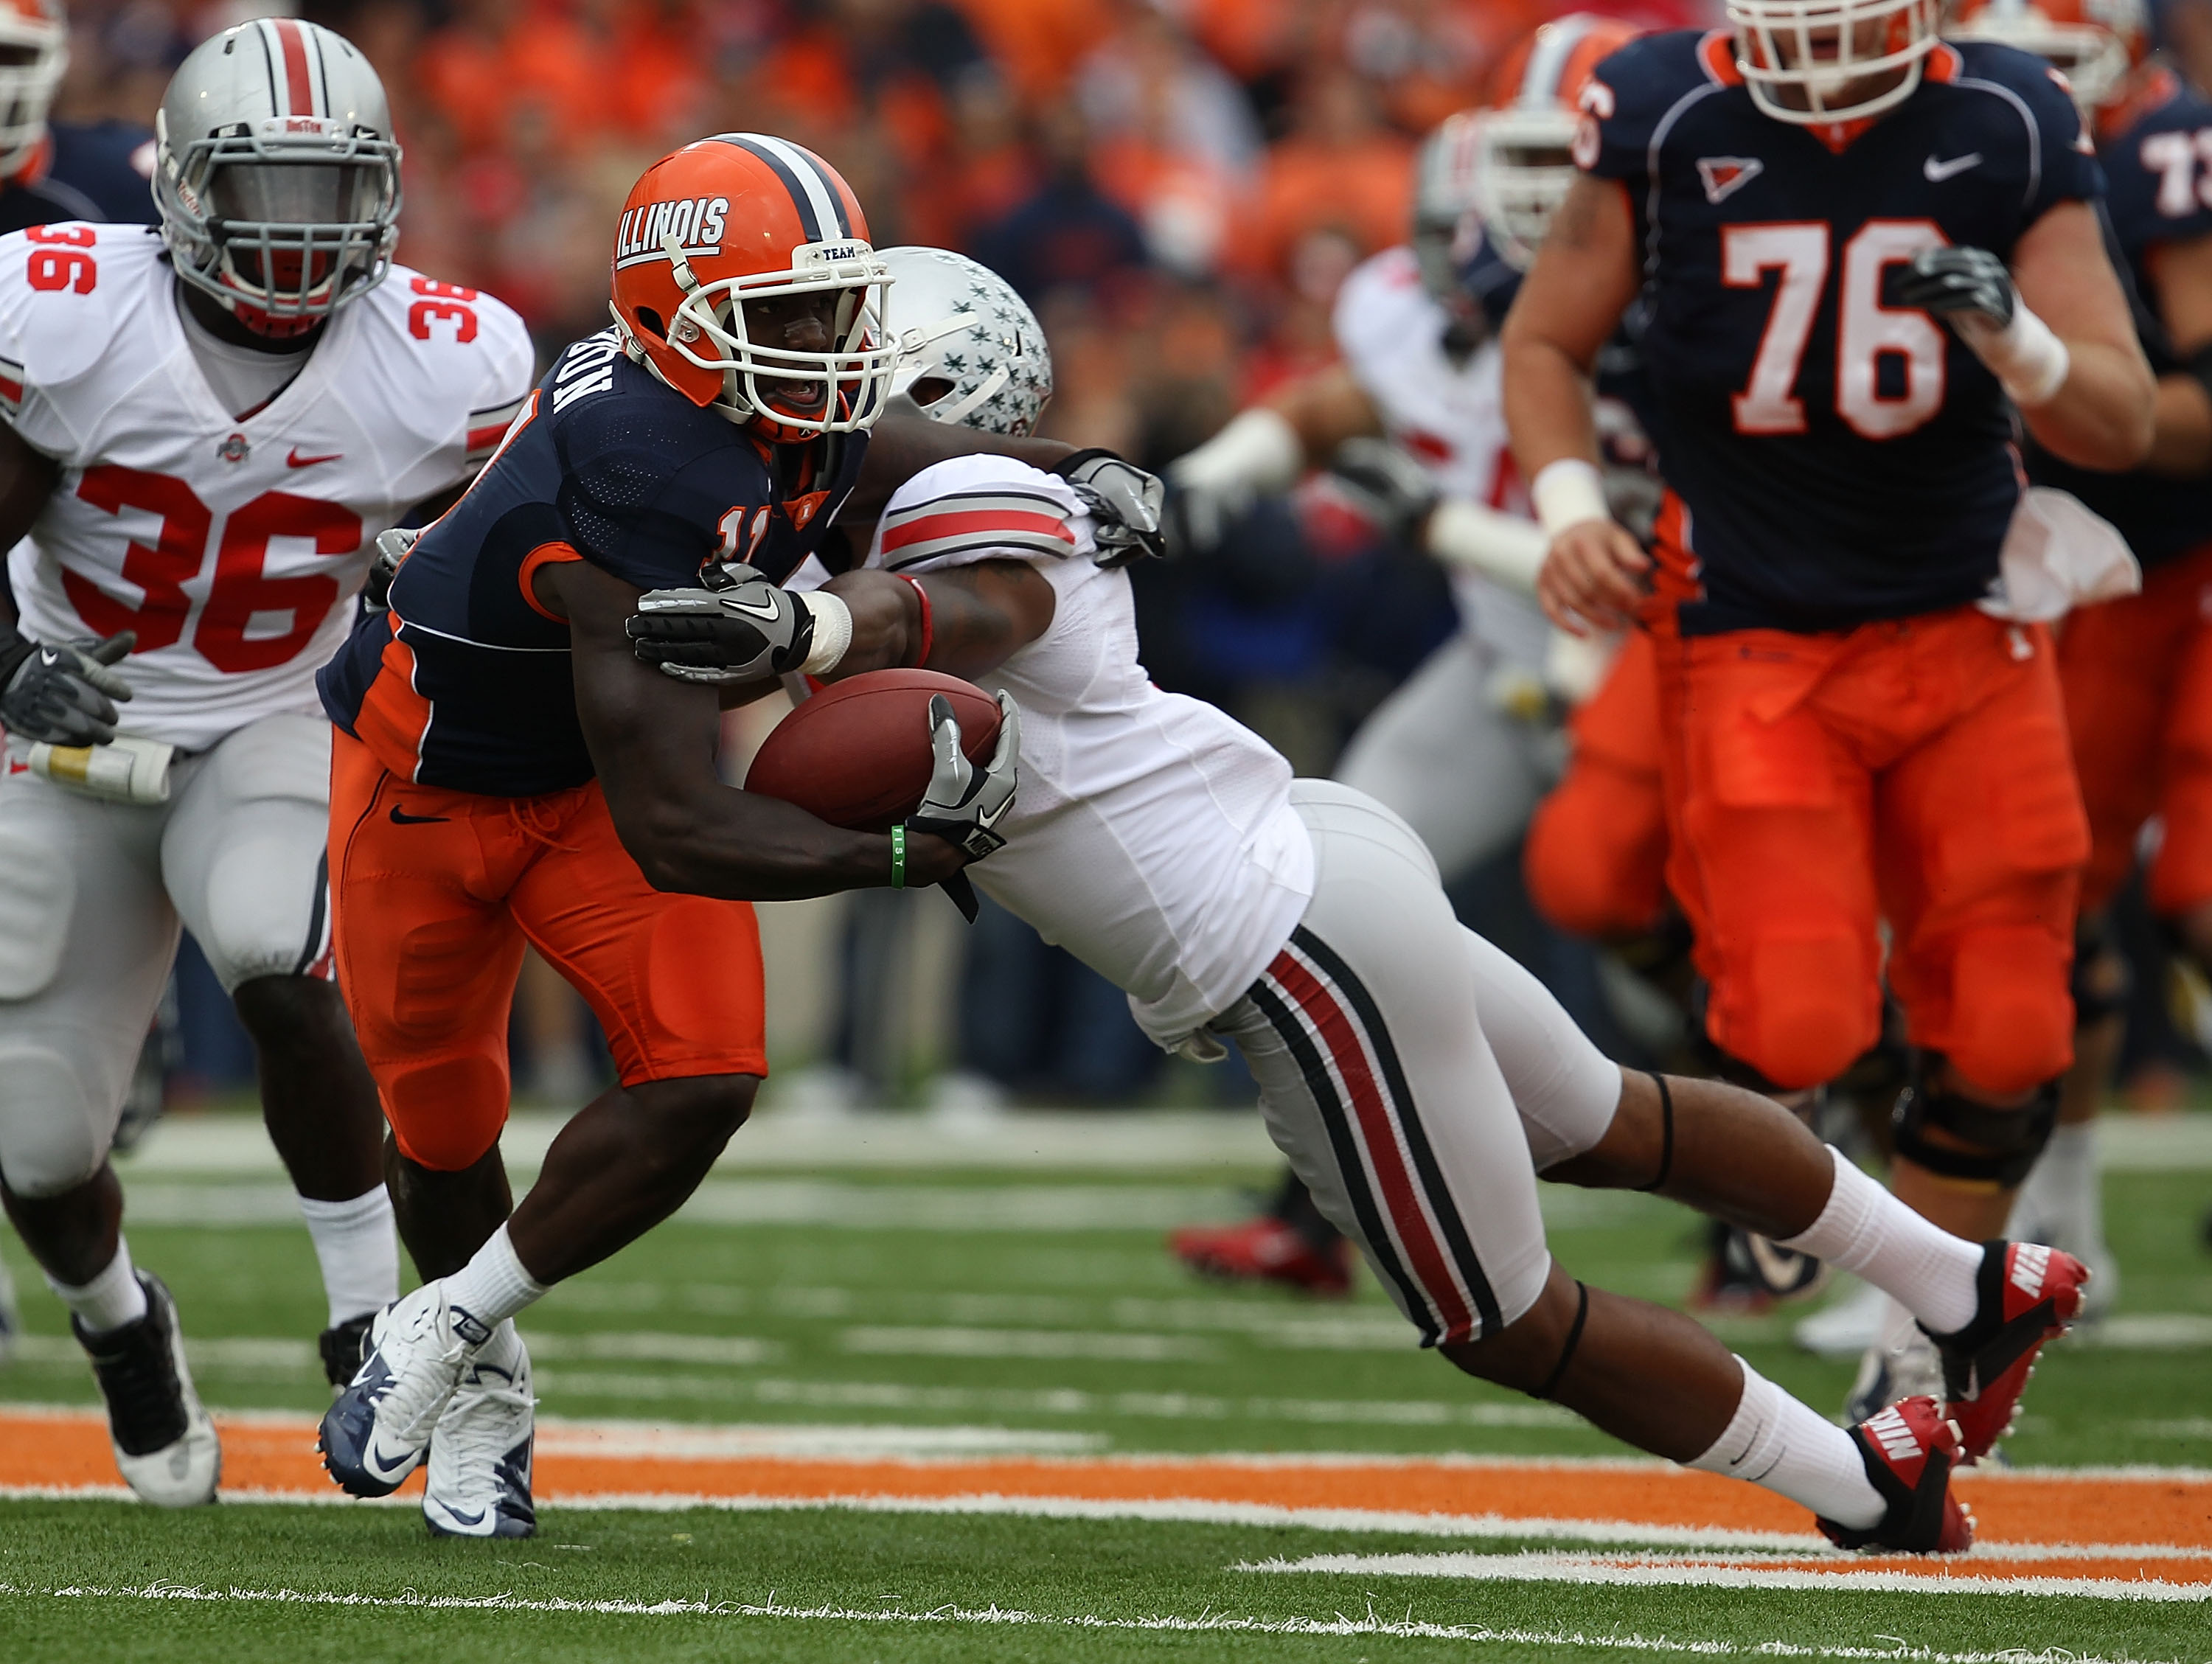 CHAMPAIGN, IL - OCTOBER 02: Jarred Fayson #11 of the Illinois Fighting Illini tries to escape Corey Brown #3 of the Ohio State Buckeyes at Memorial Stadium on October 2, 2010 in Champaign, Illinois. Ohio State defeated Illinois 24-13. (Photo by Jonathan D